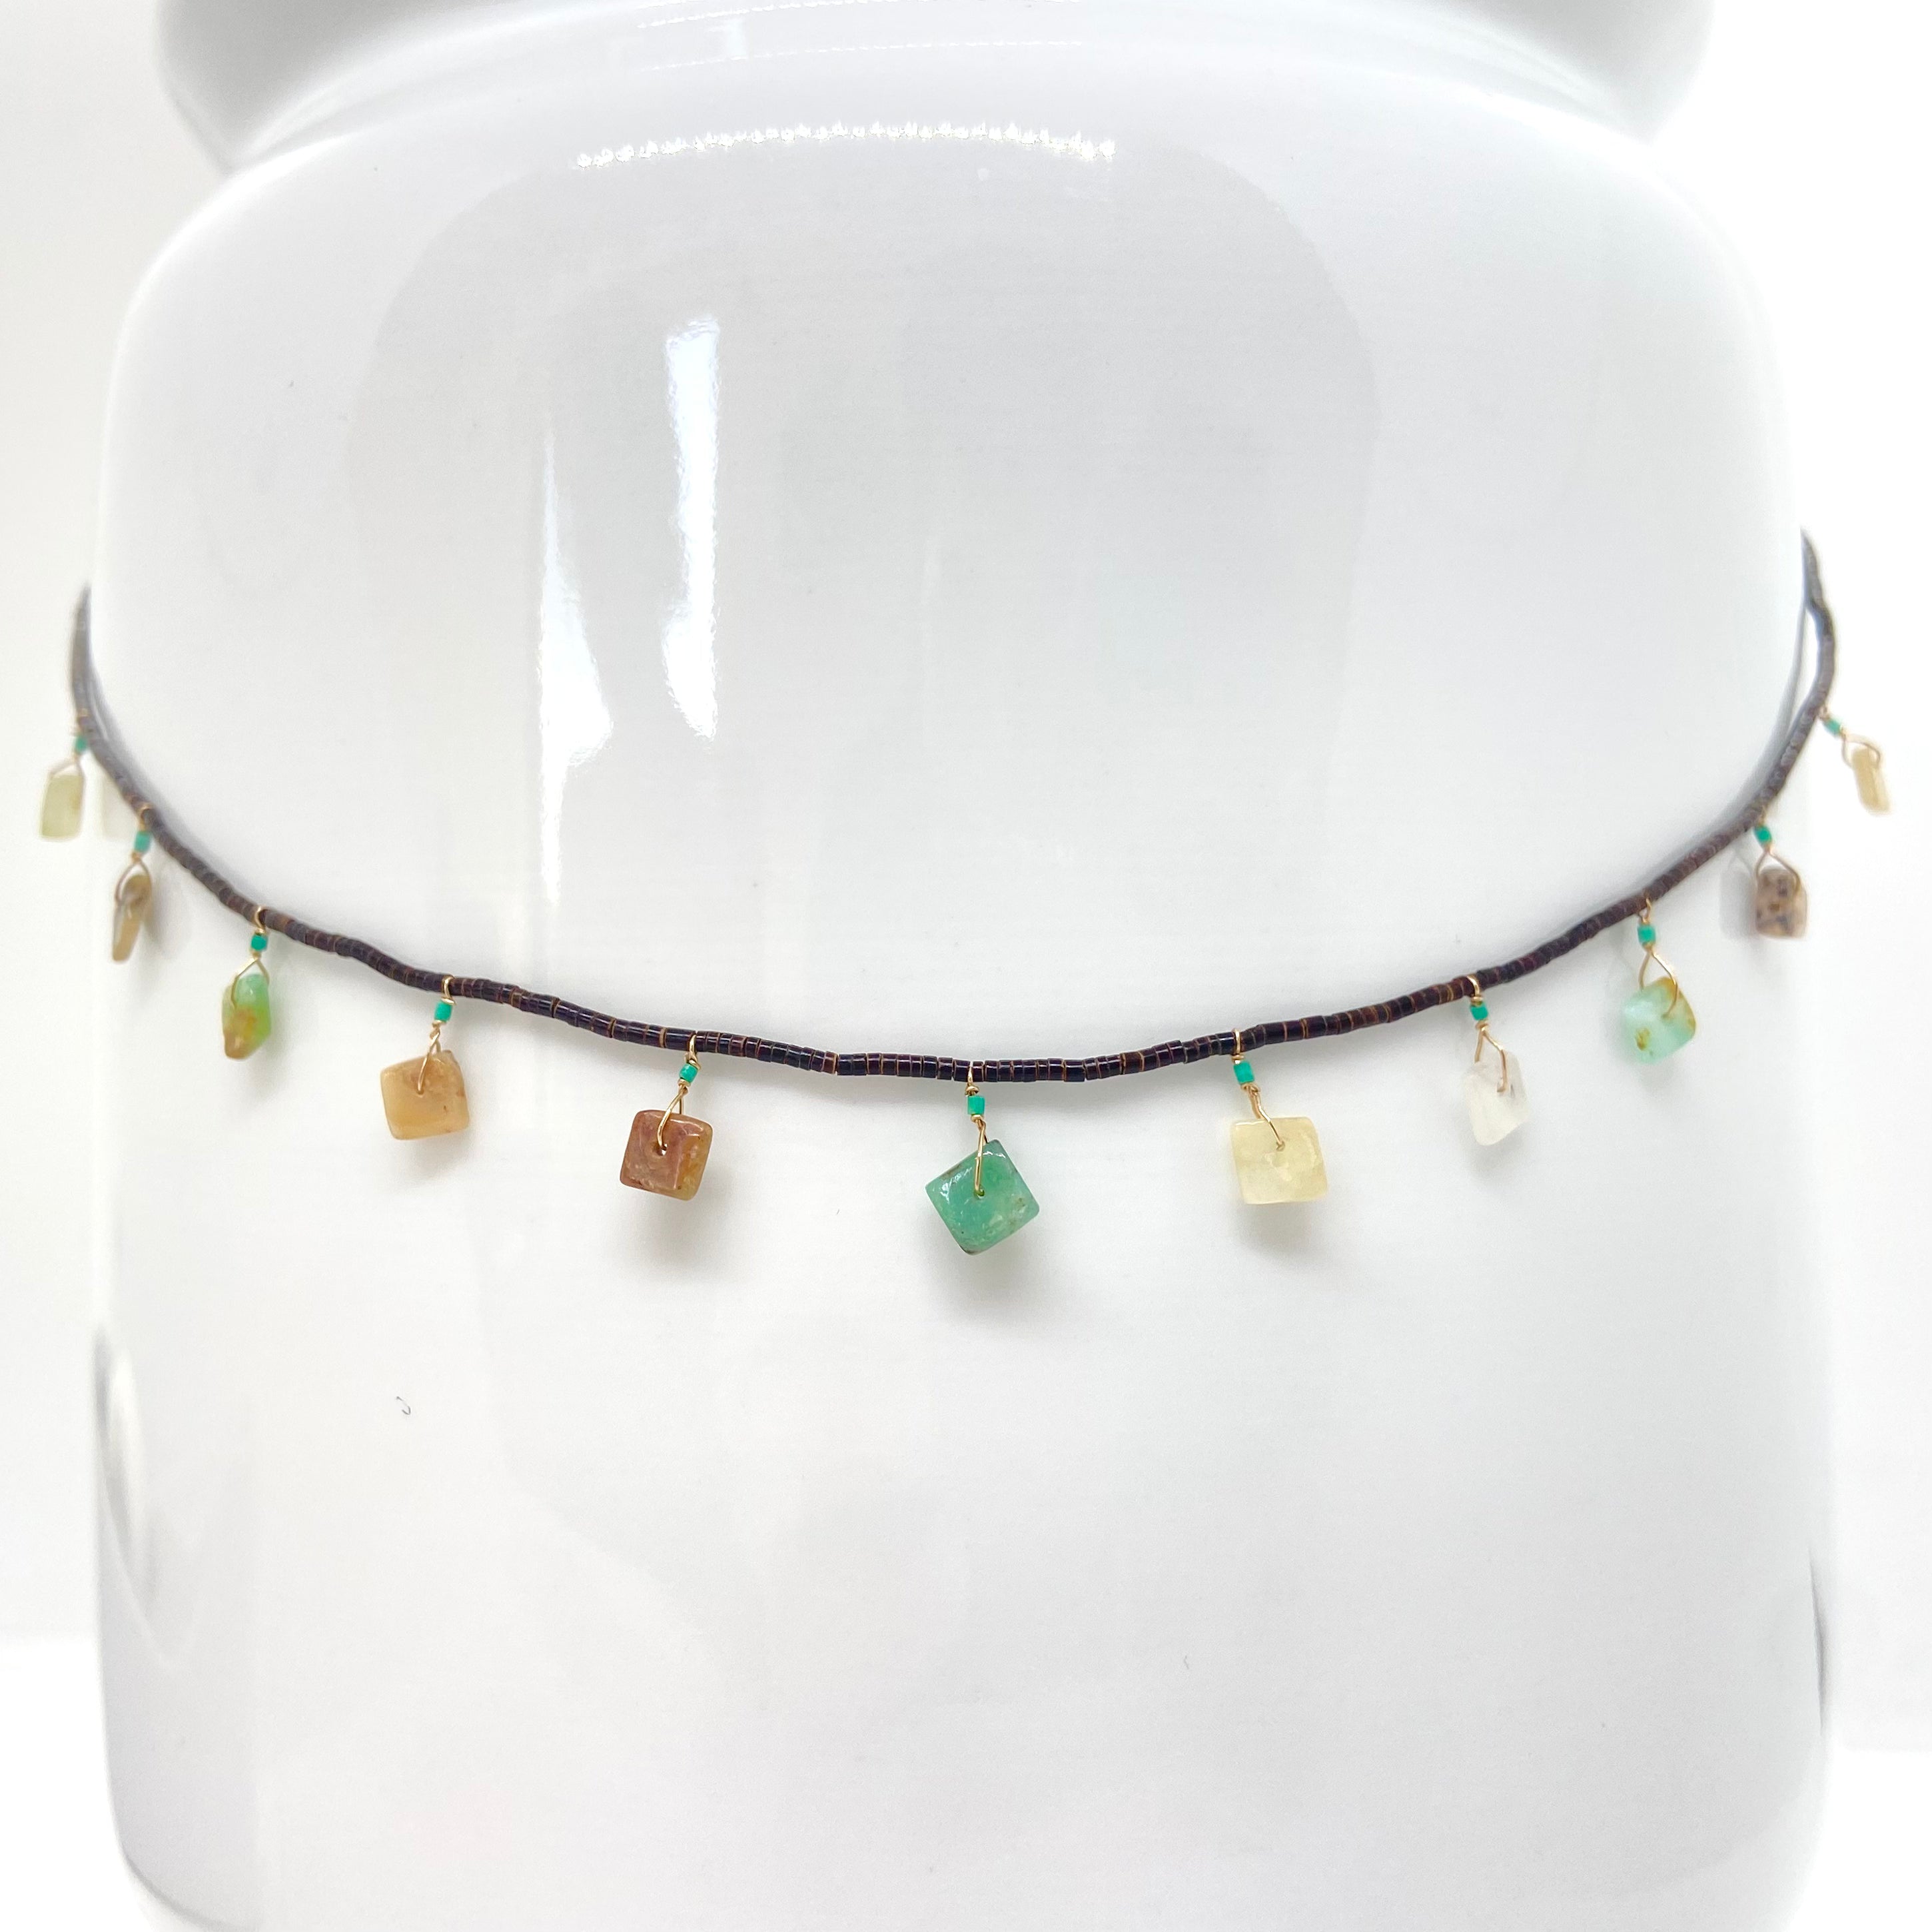 String Beaded Necklace w/ Opal, Turquoise Tucum Coconut Beads